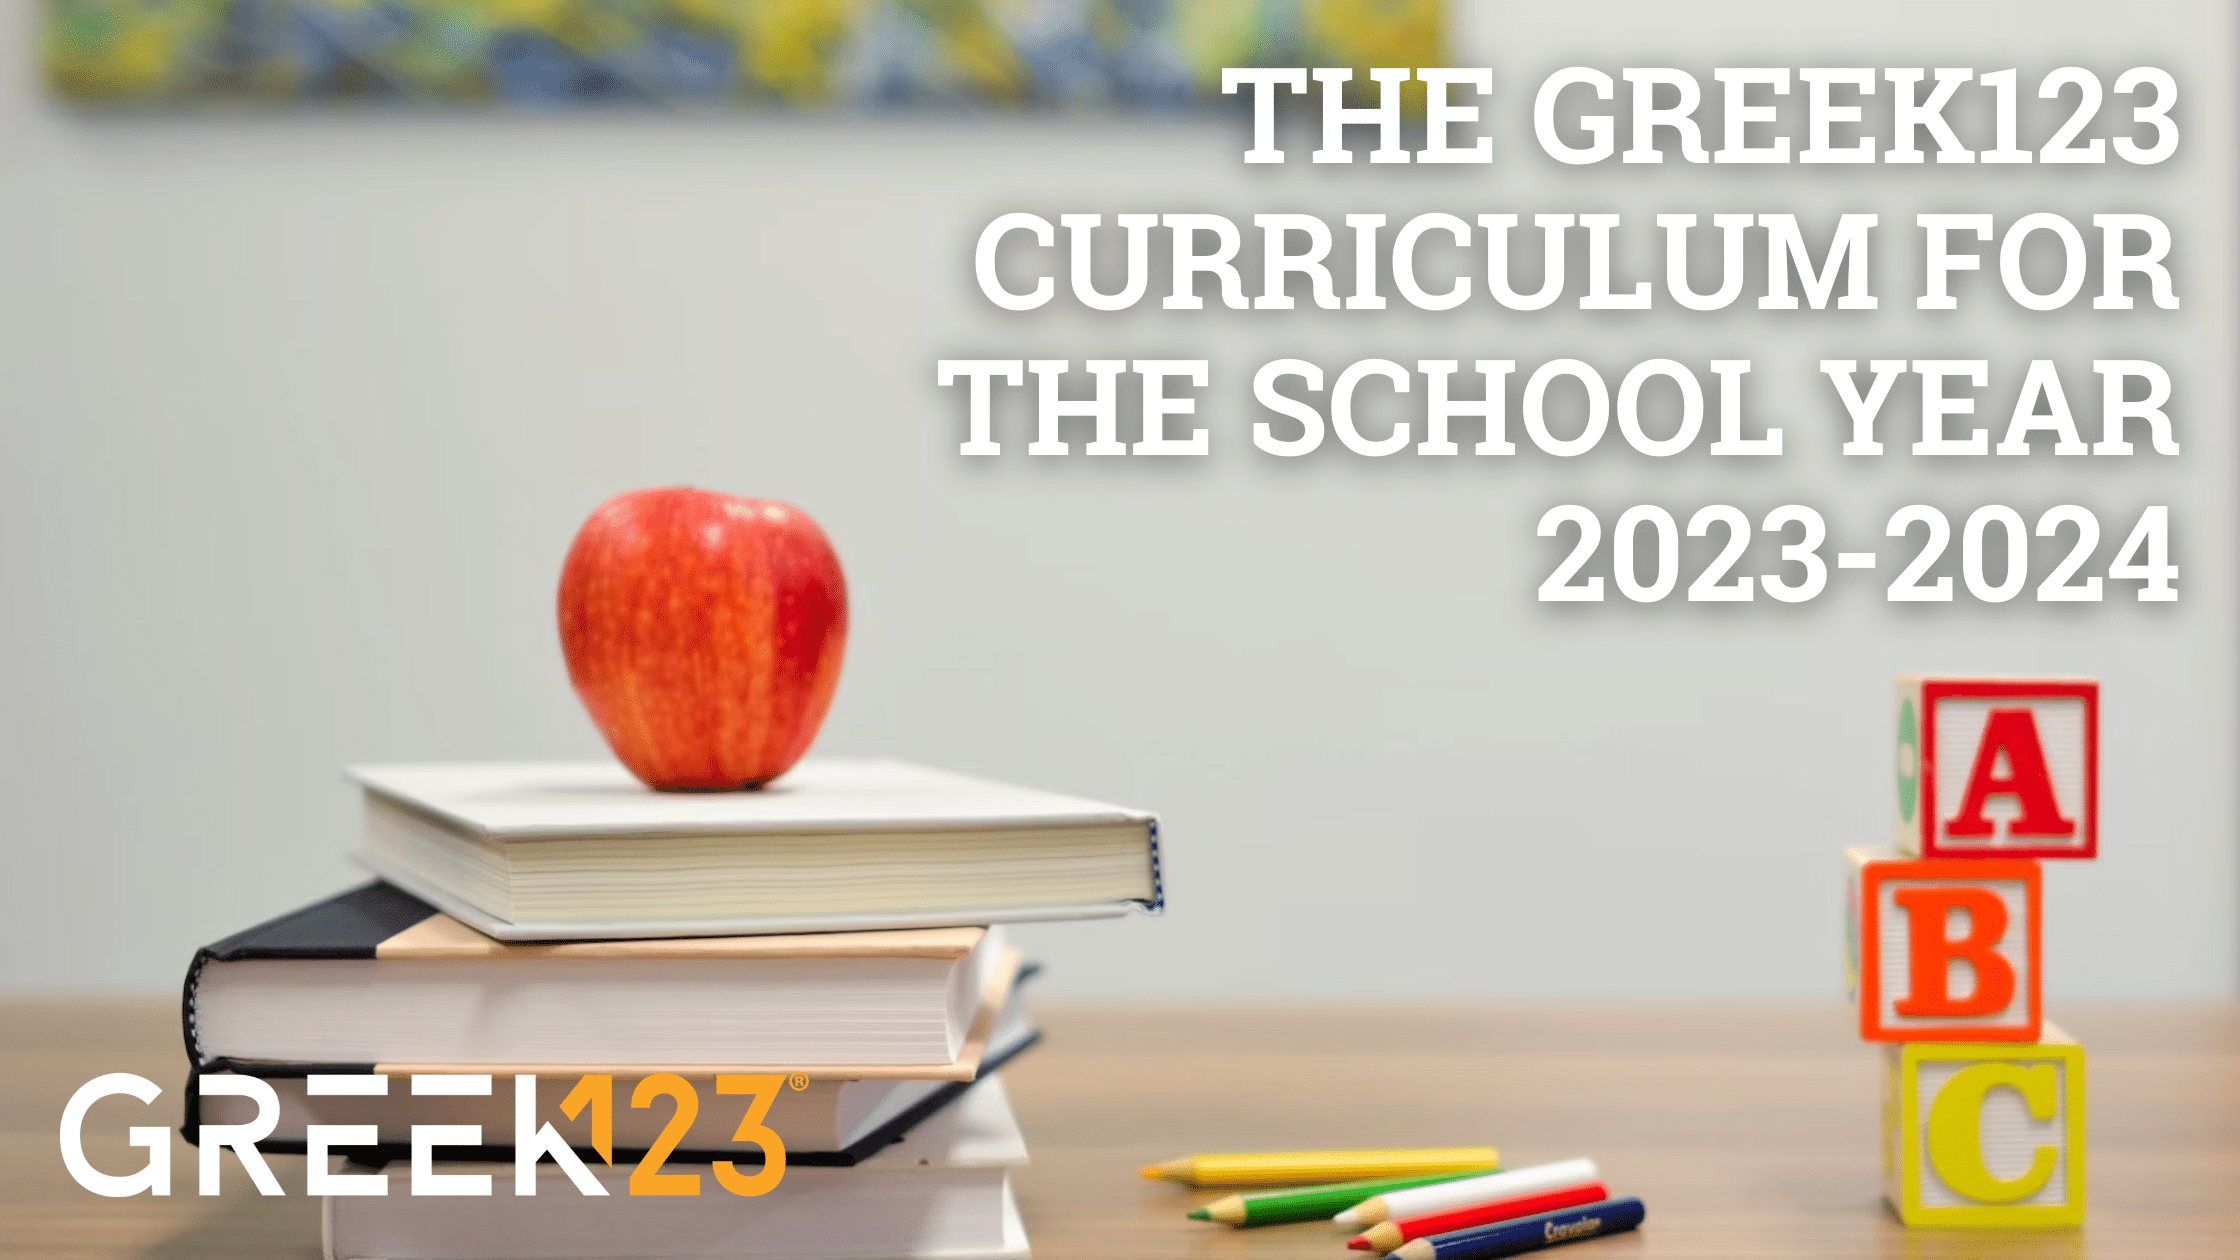 Learner Spotlight: The Greek123 Curriculum for the School Year 2023-2024